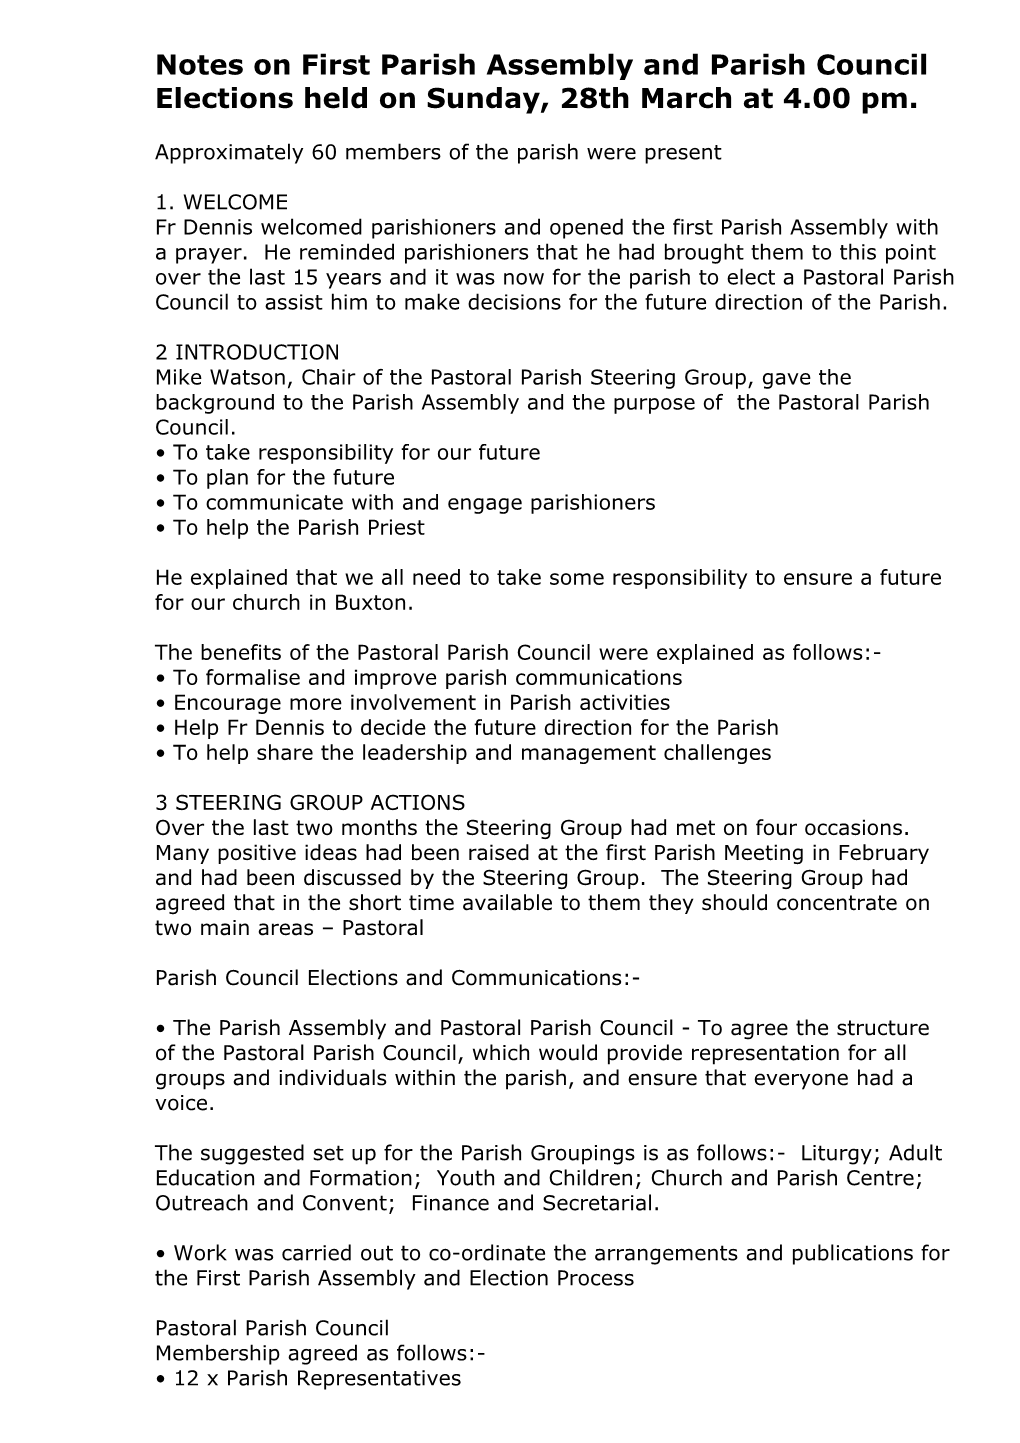 Notes on First Parish Assembly and Parish Council Elections Held on Sunday, 28Th March at 4